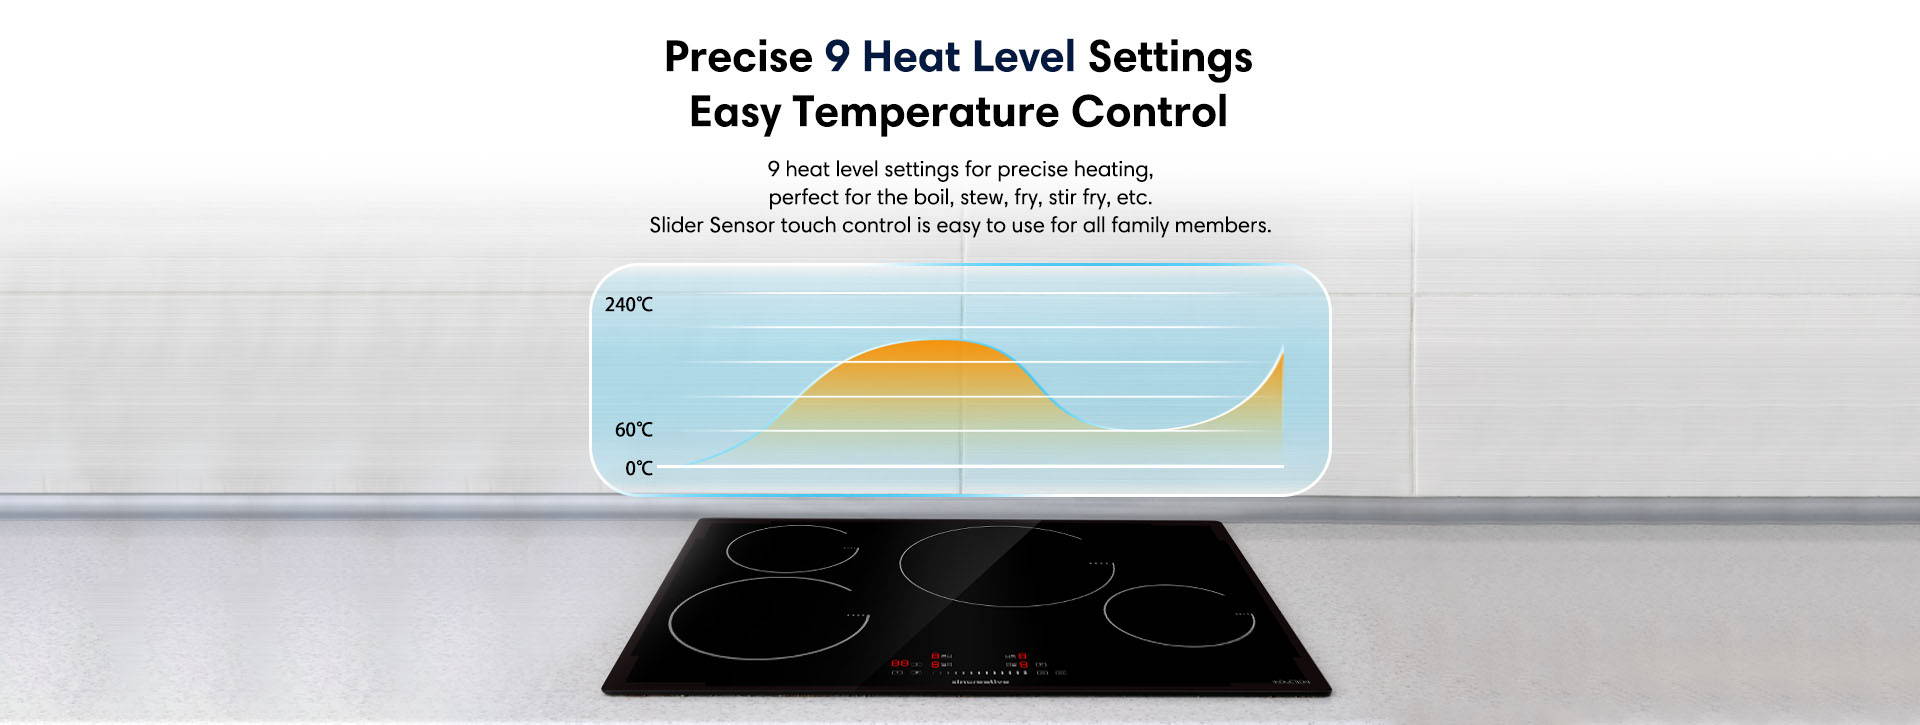 Precise 9 heat level srttings easy temperature control 9 heat level settings for precise heating, perfect for the boil, stew, fry, stir fry, ect. Slider sensor touch control is easy to use for all family members.